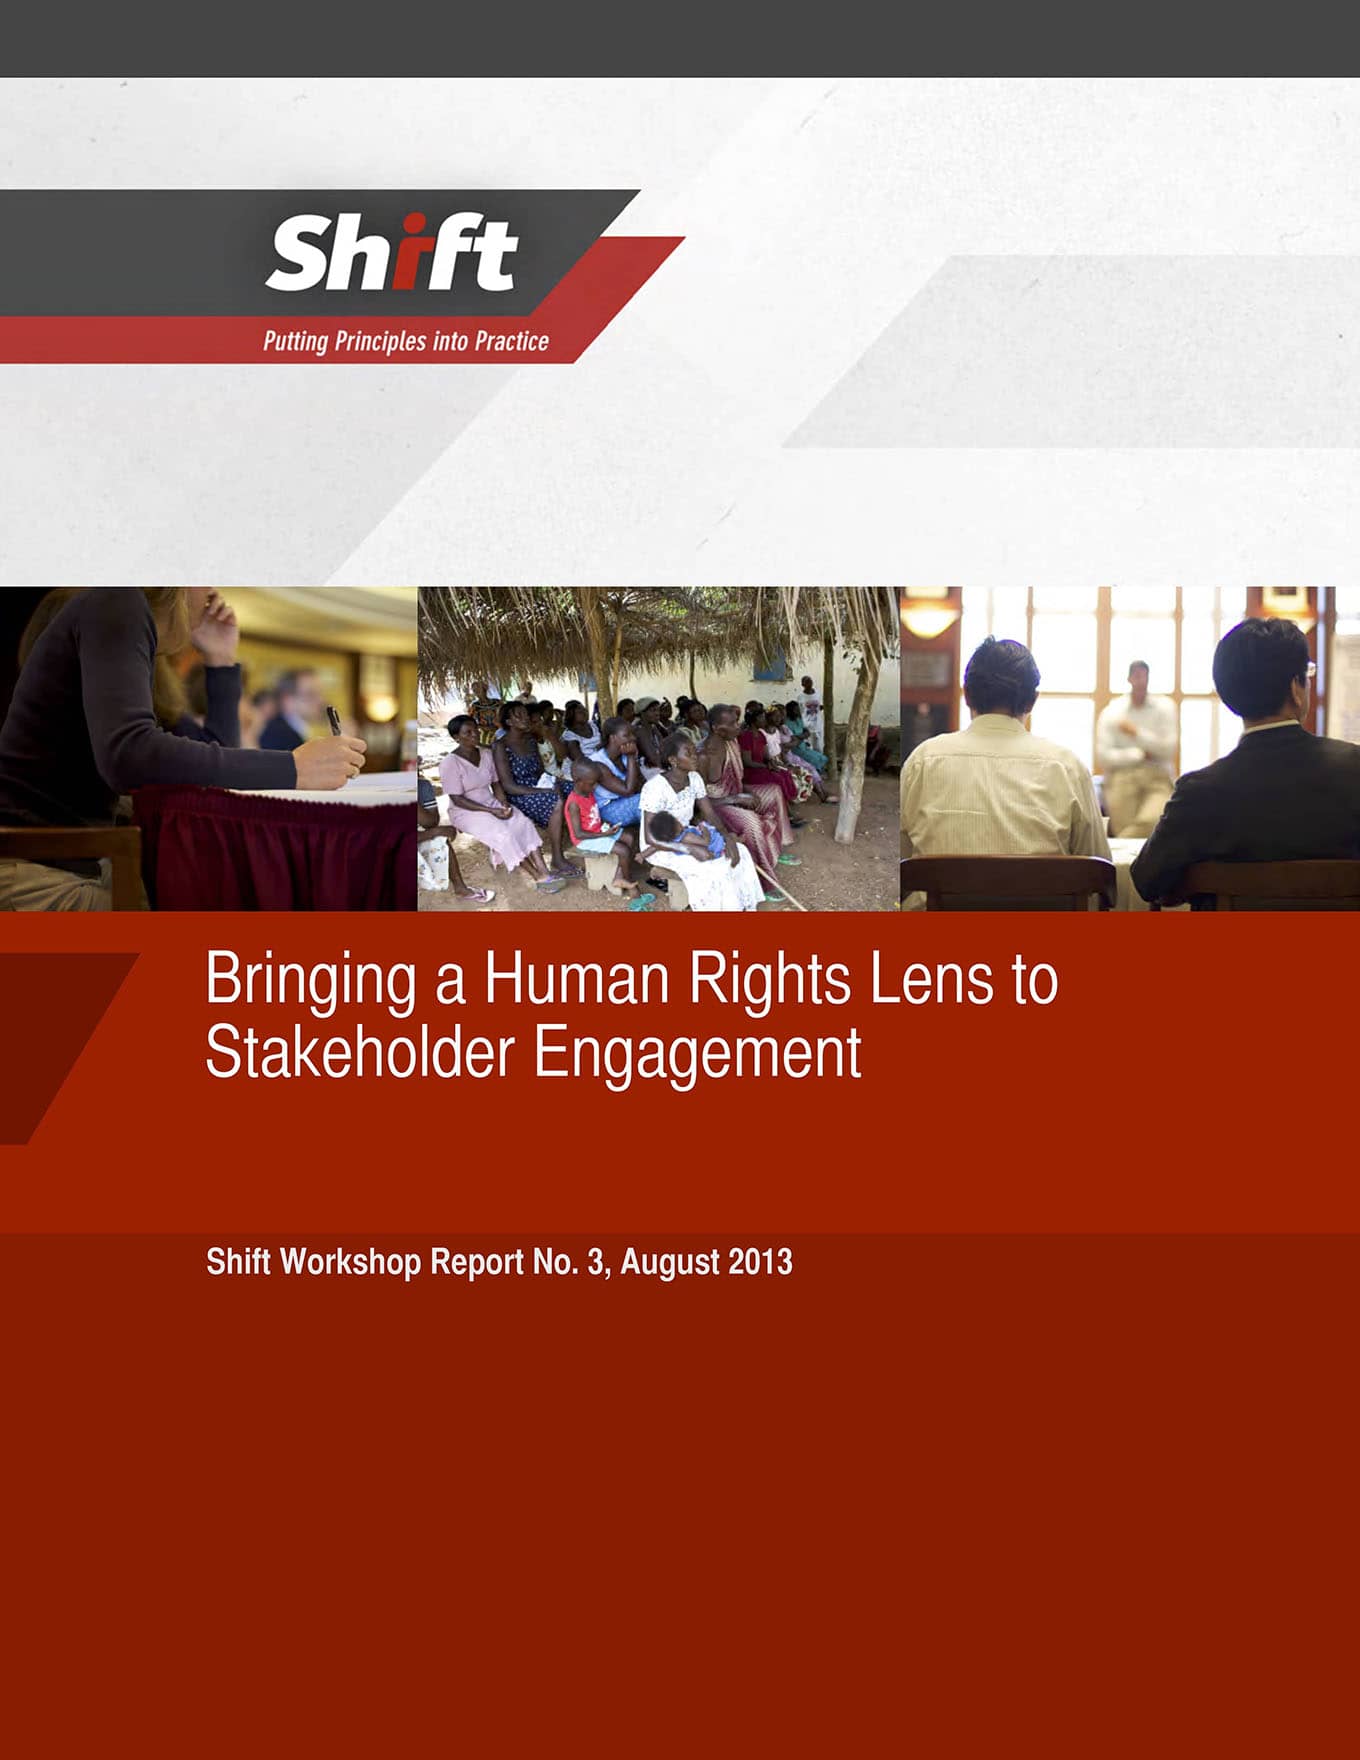 Bringing a Human Rights Lens to Stakeholder Engagement (Shift, 2013)